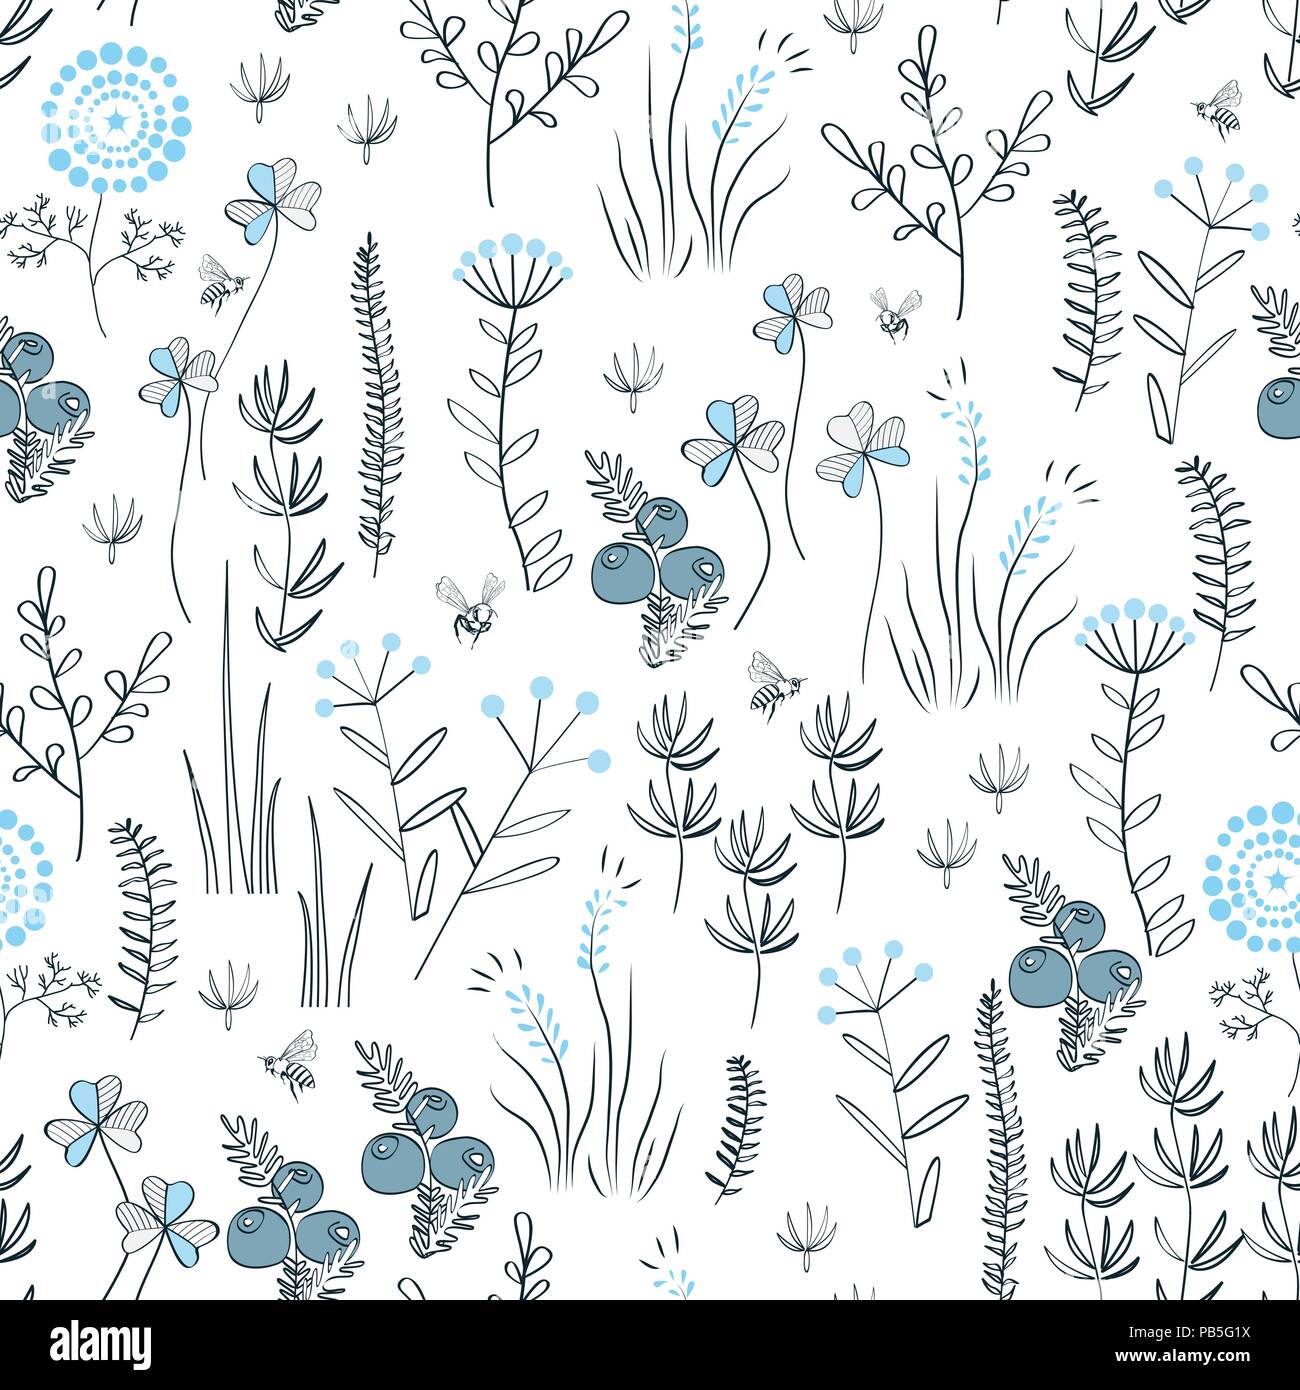 Floral vector seamless pattern with wild herbs, forest flowers and leaves. Vintage botanical background. Hand drawn natural meadow Stock Vector